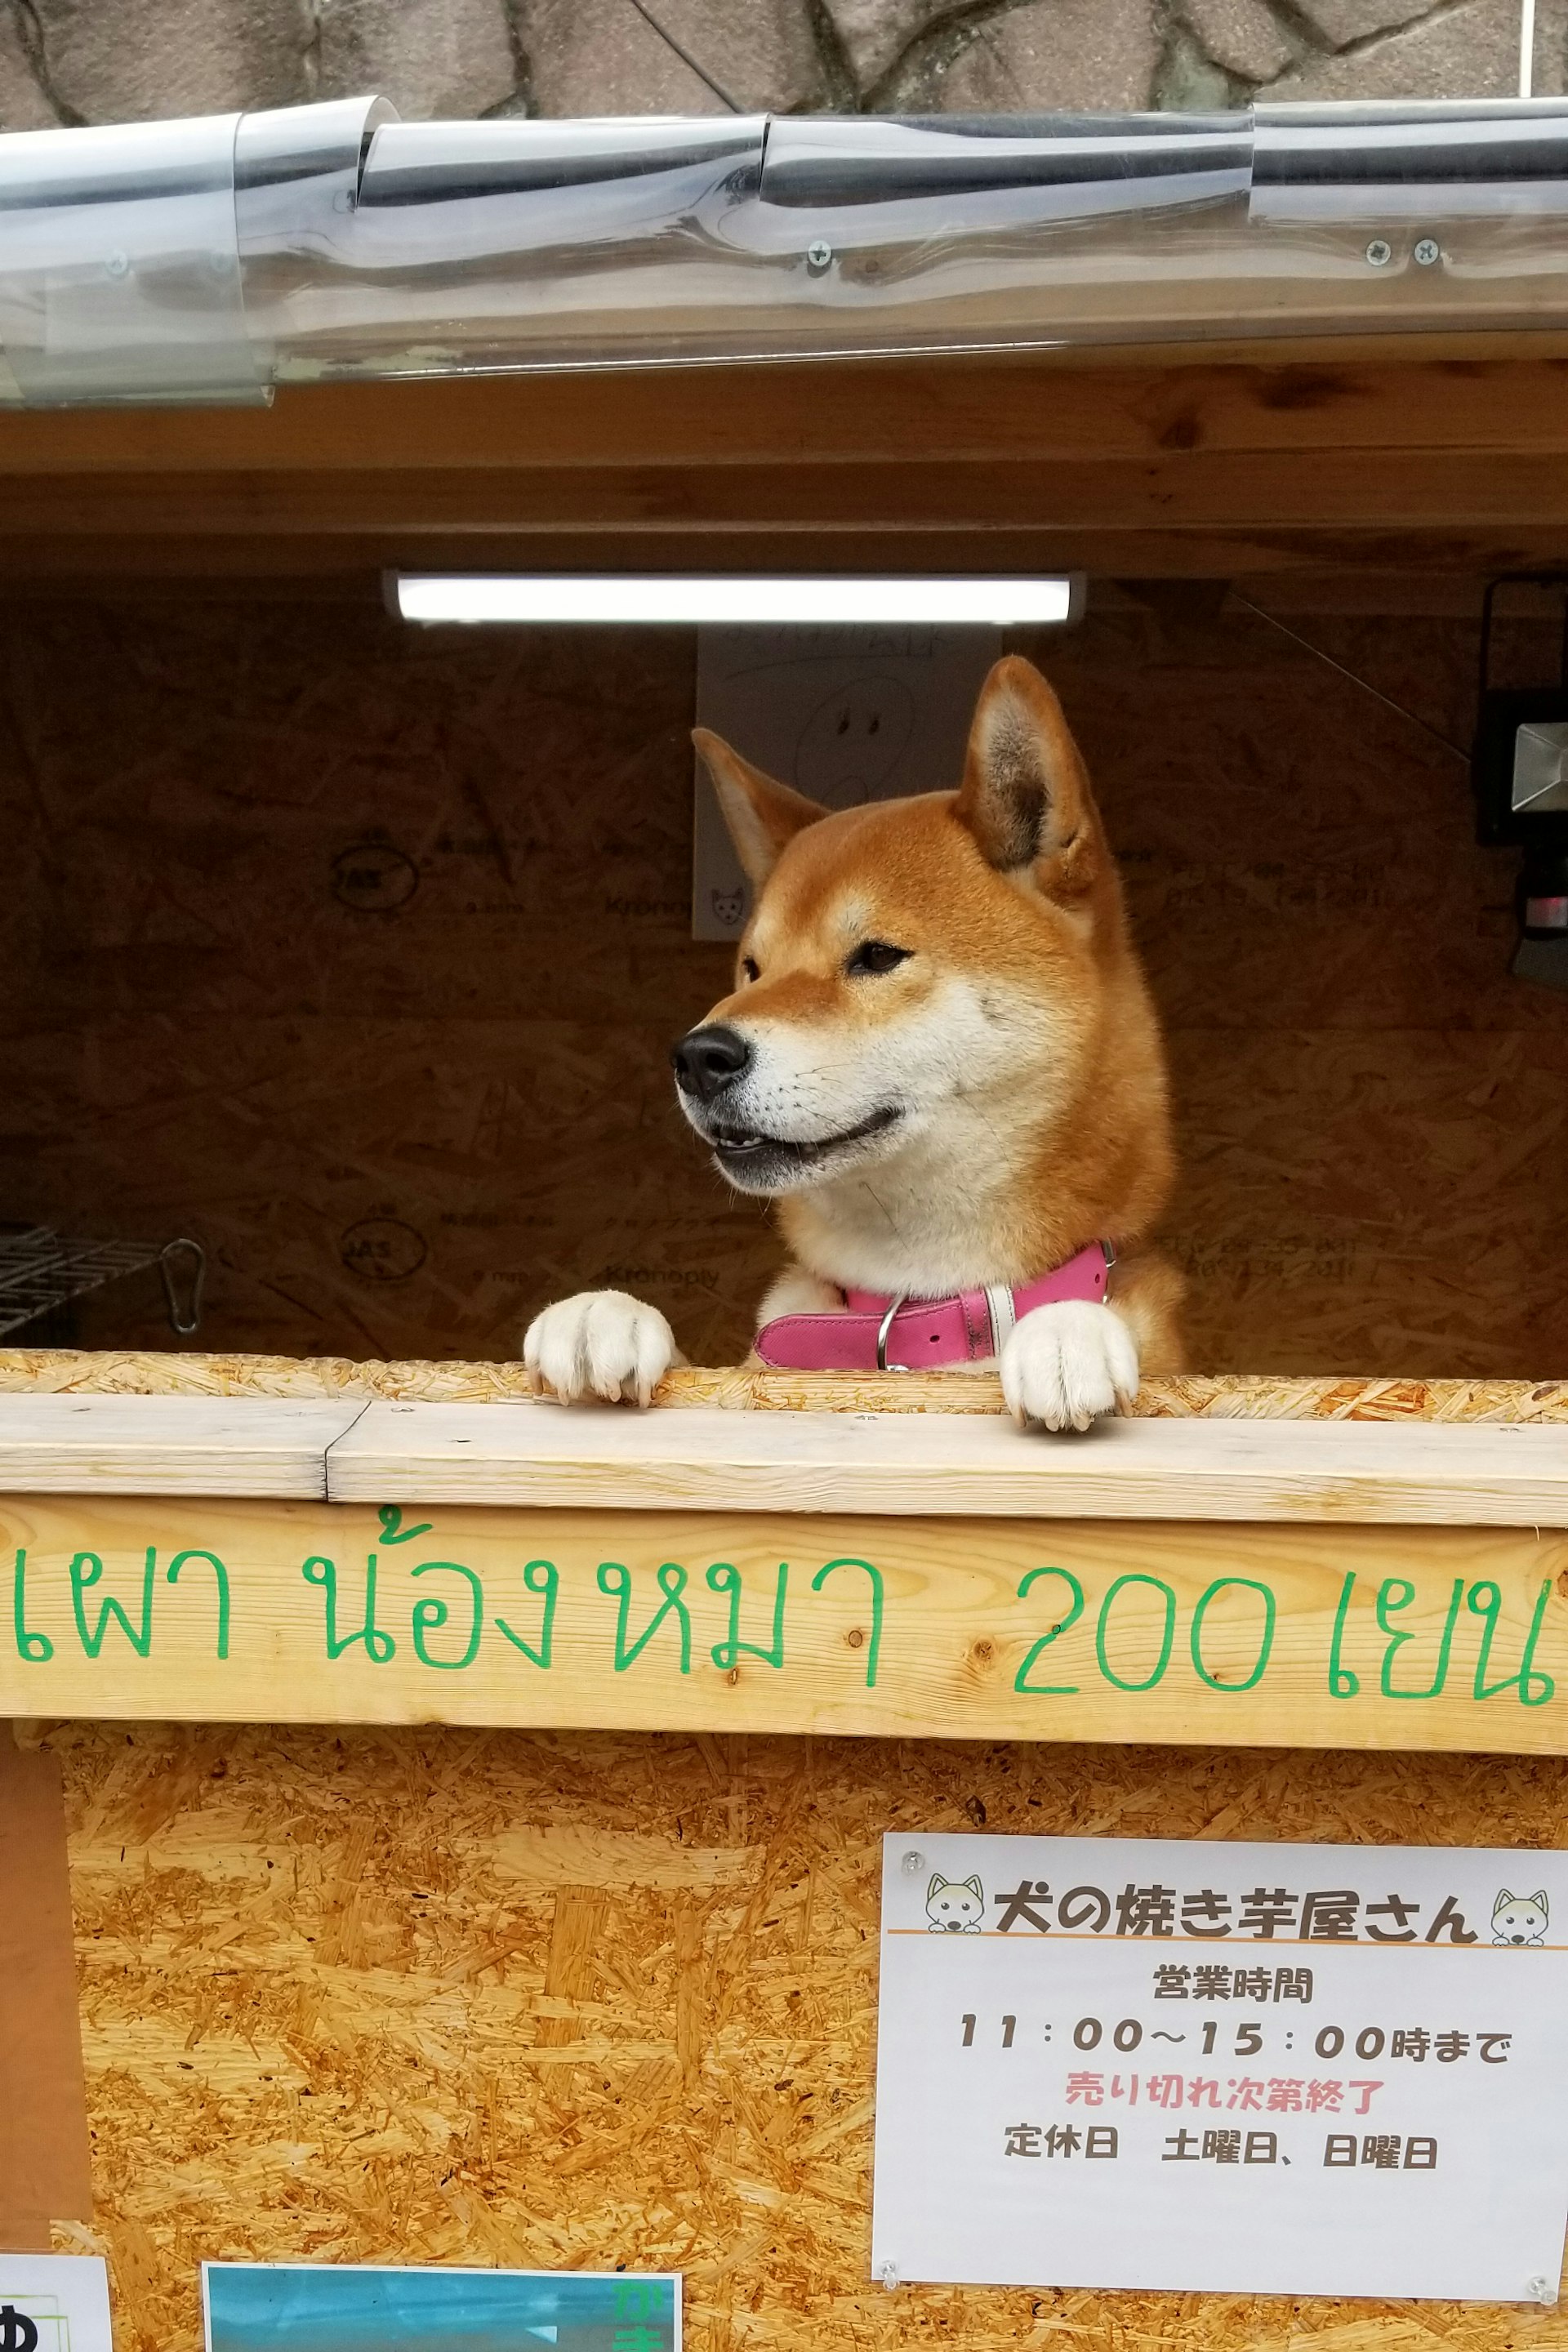 An alert shiba inu looking through the window of a wooden food stand